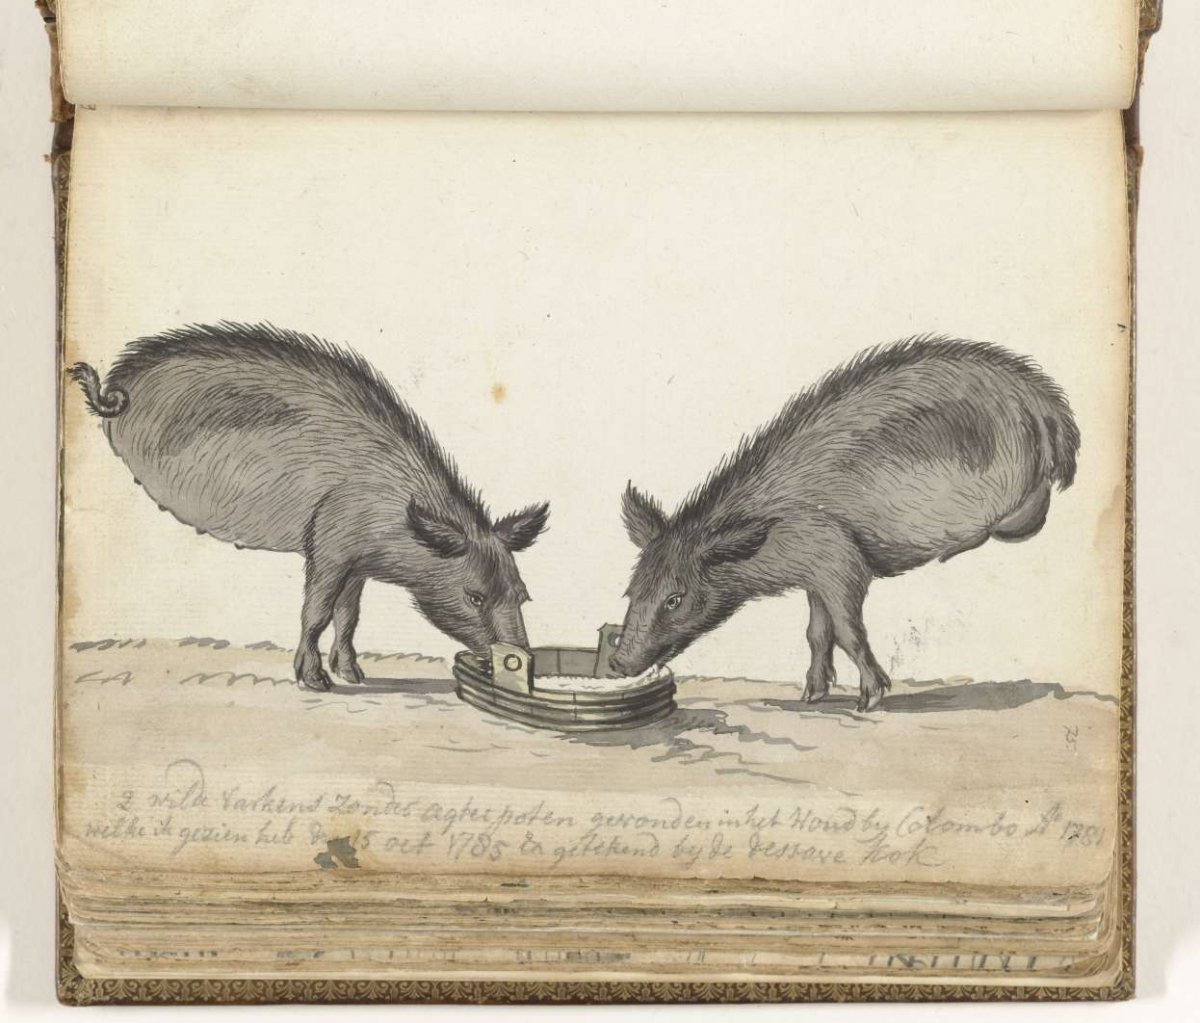 Pigs without hind legs at trough, Jan Brandes, 1785